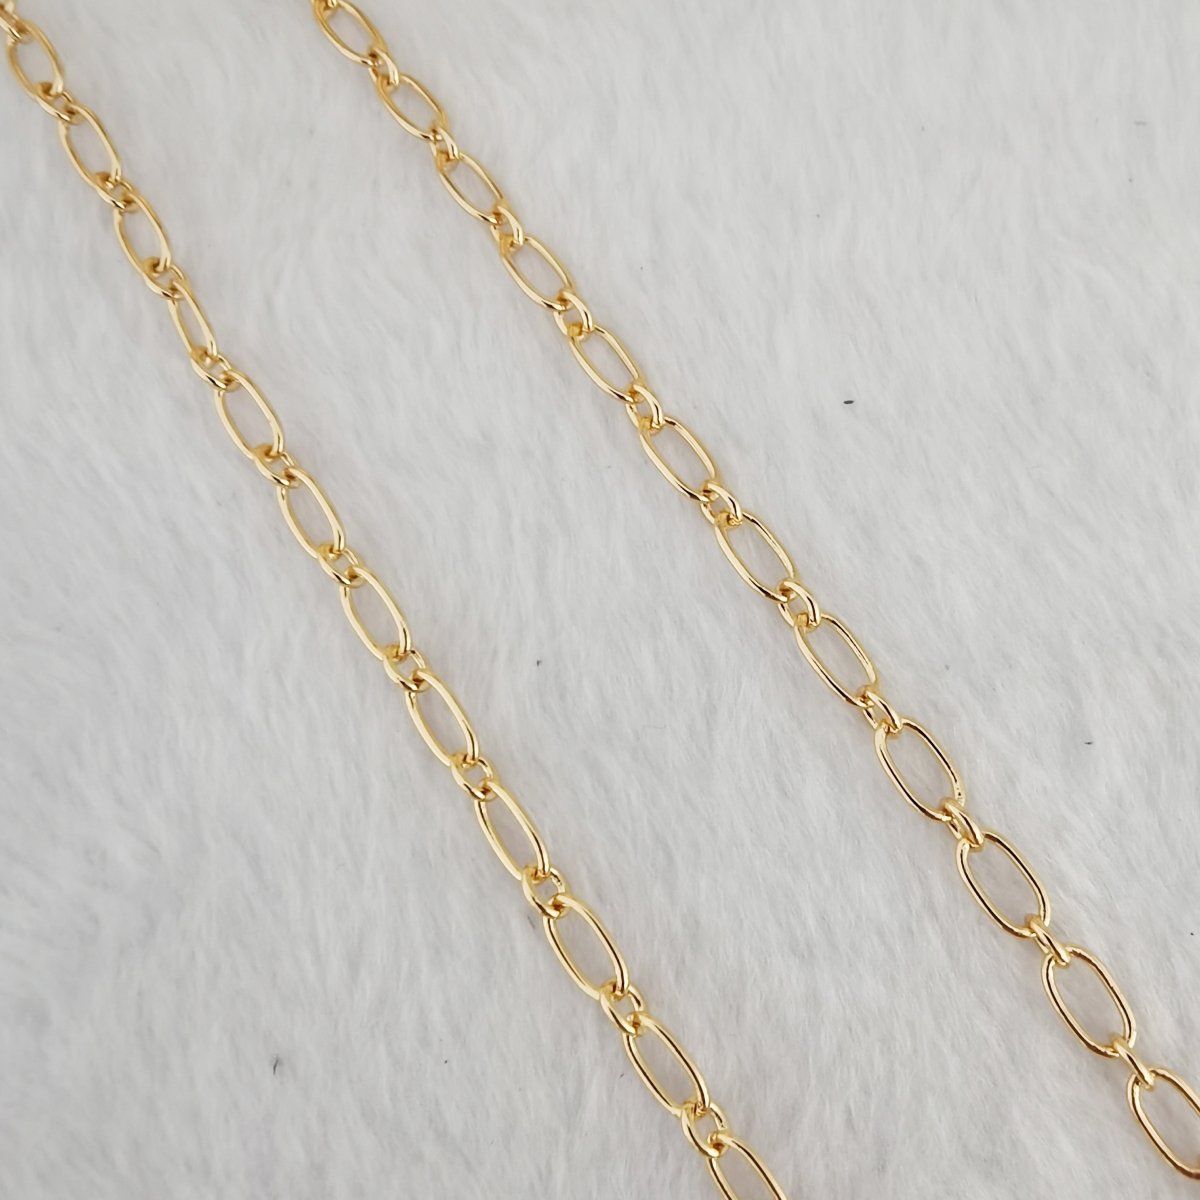 24K Gold, 18K Gold, White Gold Filled CABLE Roll Chain For Jewelry Making, For Necklace Bracelet Anklet Supply Component | ROLL-478(XP-006), ROLL-480(XP-008), ROLL-483 (XP-011) Clearance Pricing - DLUXCA